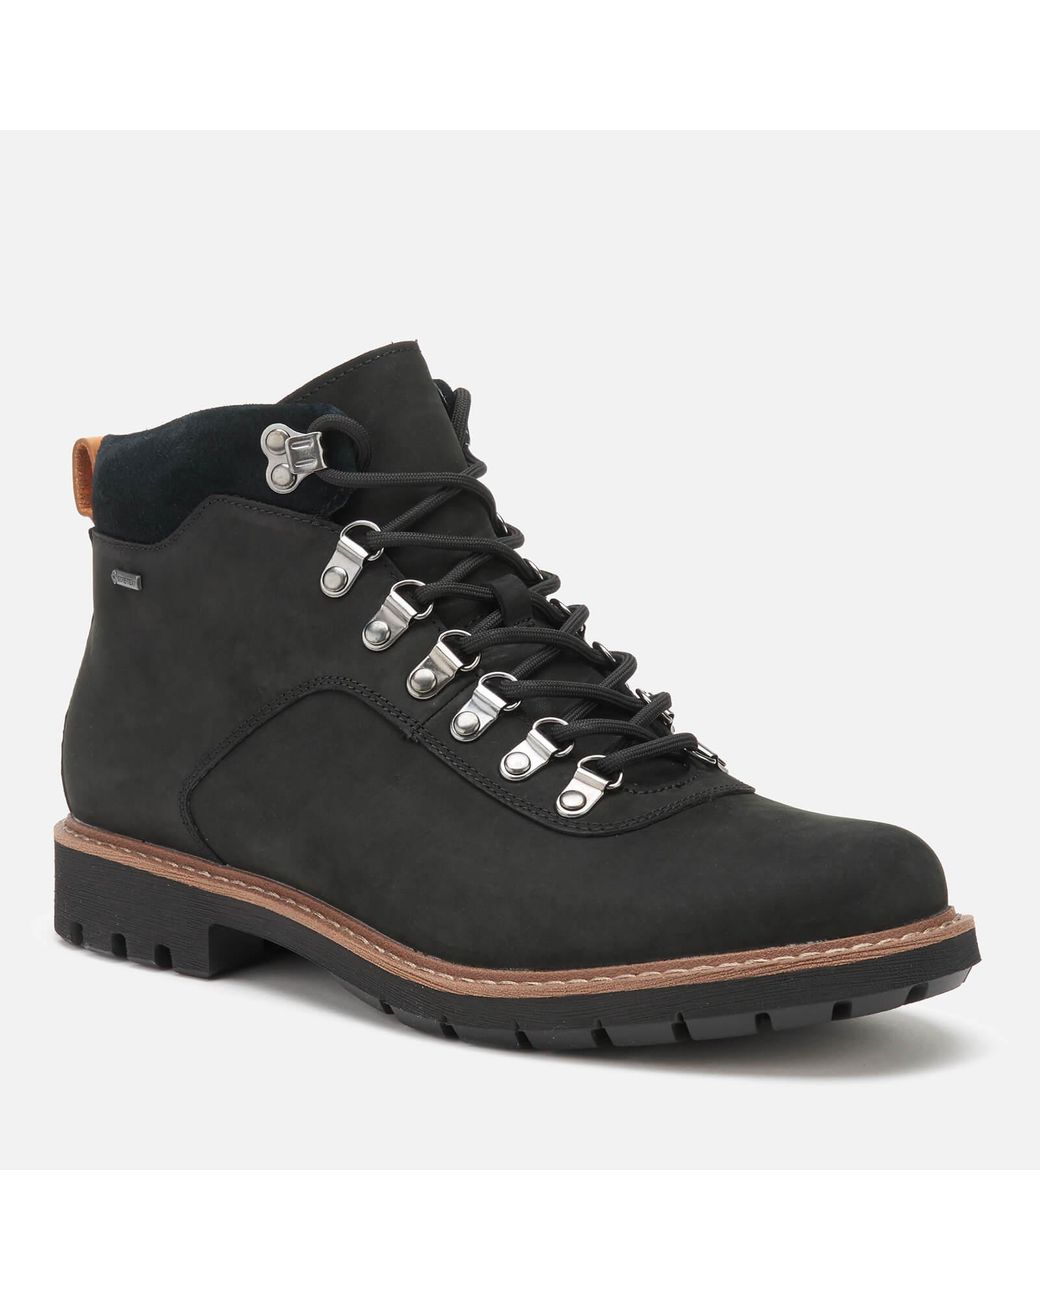 Clarks Alp Gore-tex Nubuck Style Boots in Black for | Lyst Canada